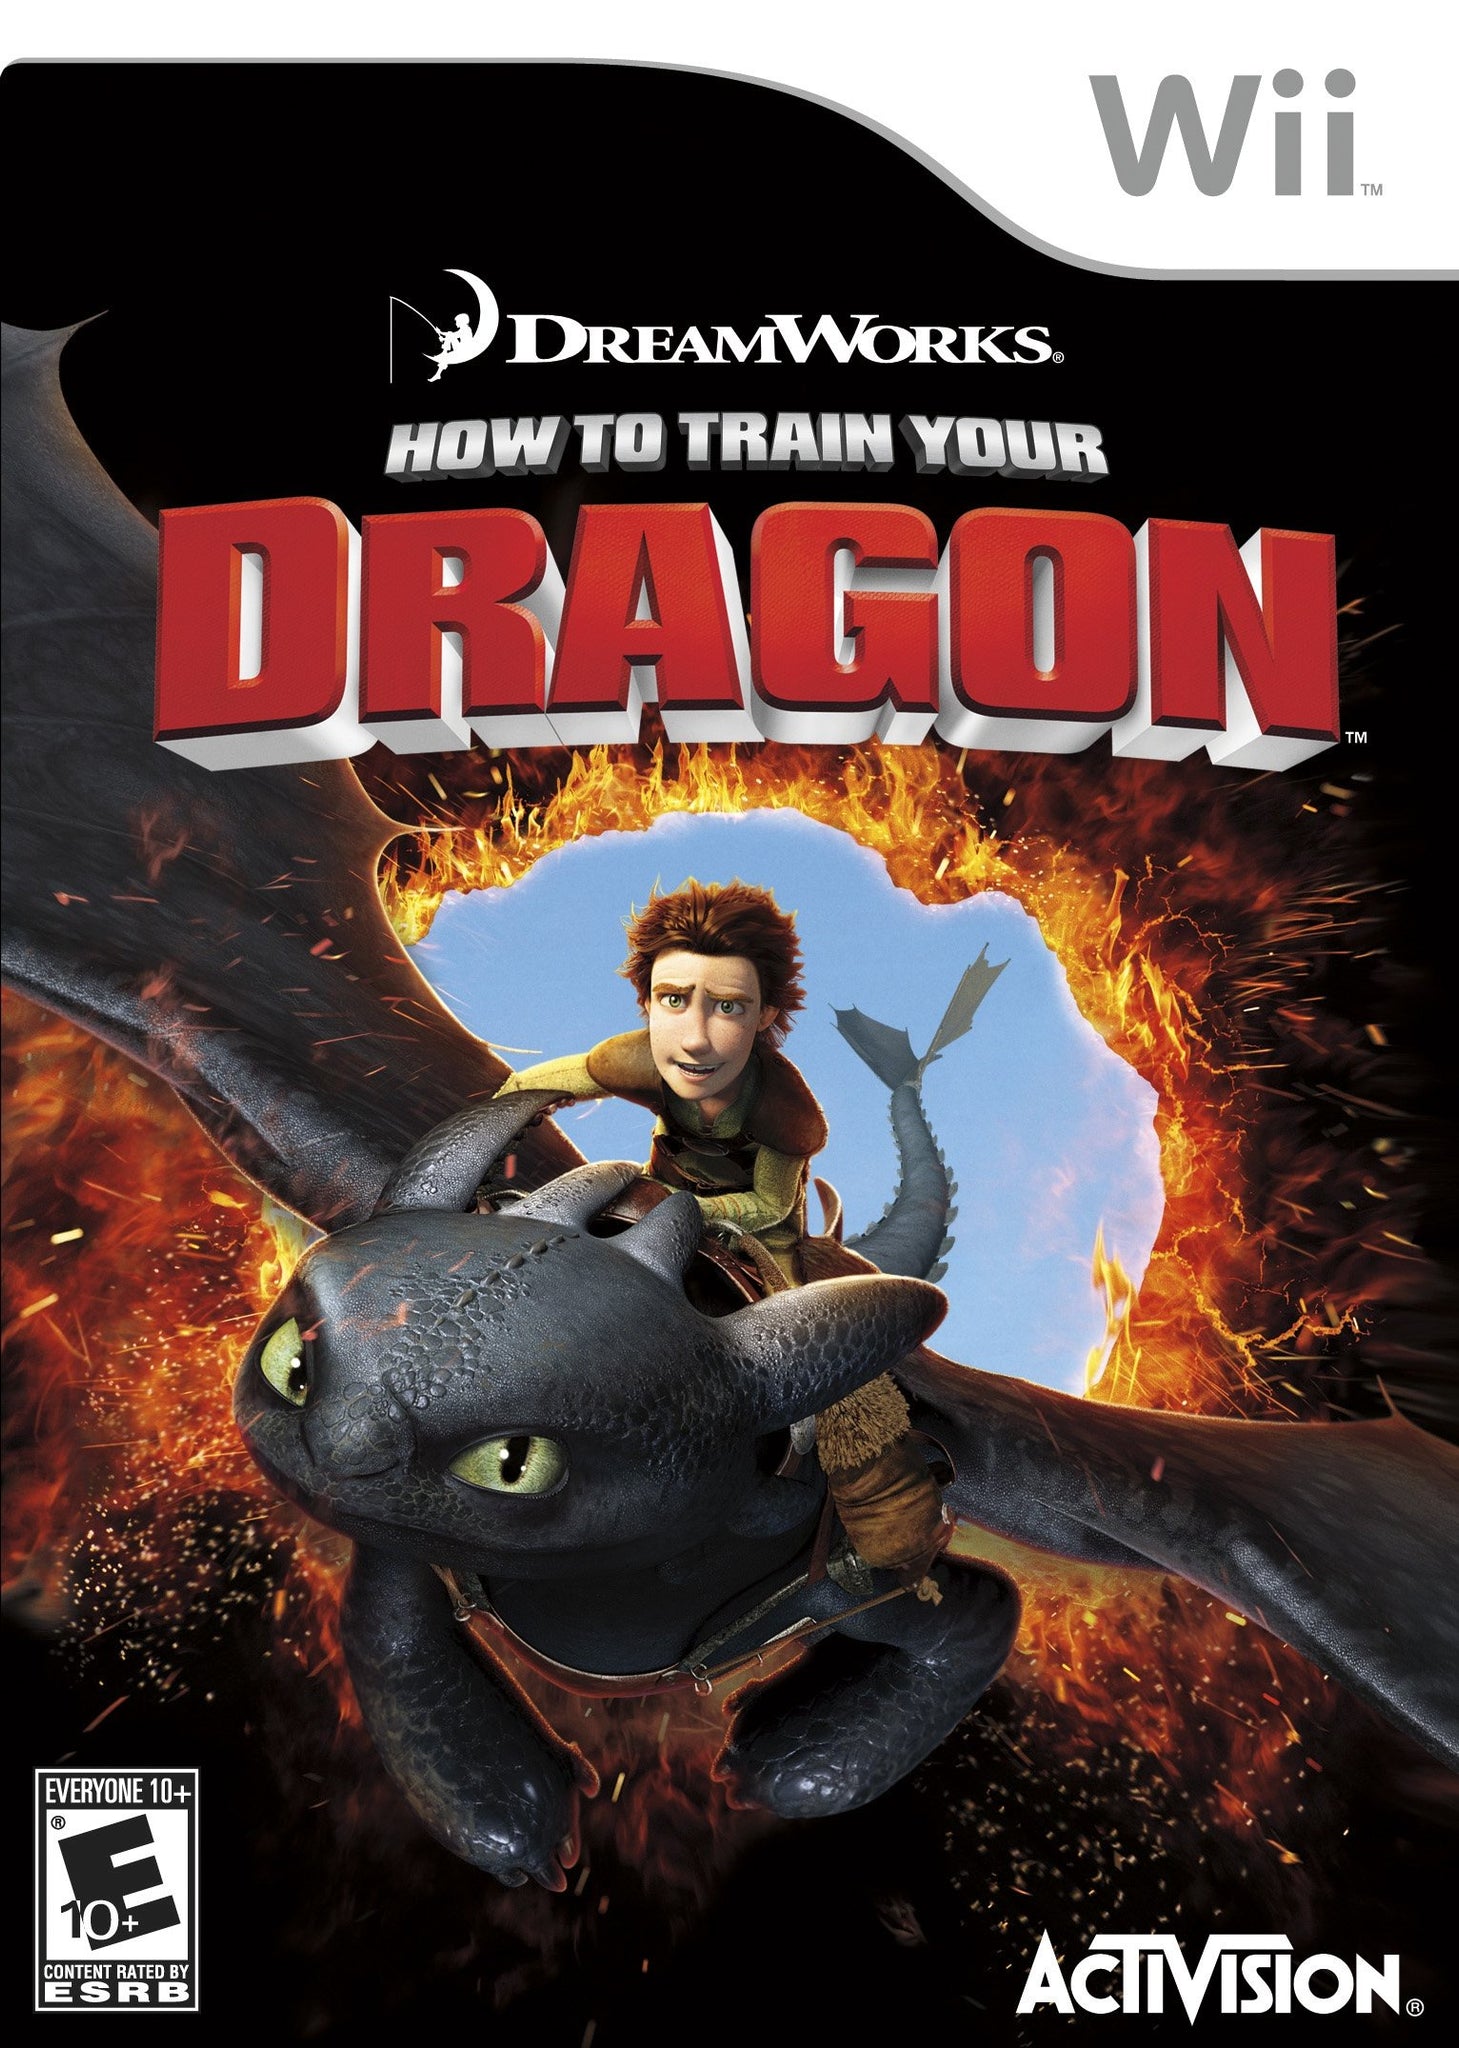 How to Train Your Dragon - Wii (Pre-owned)